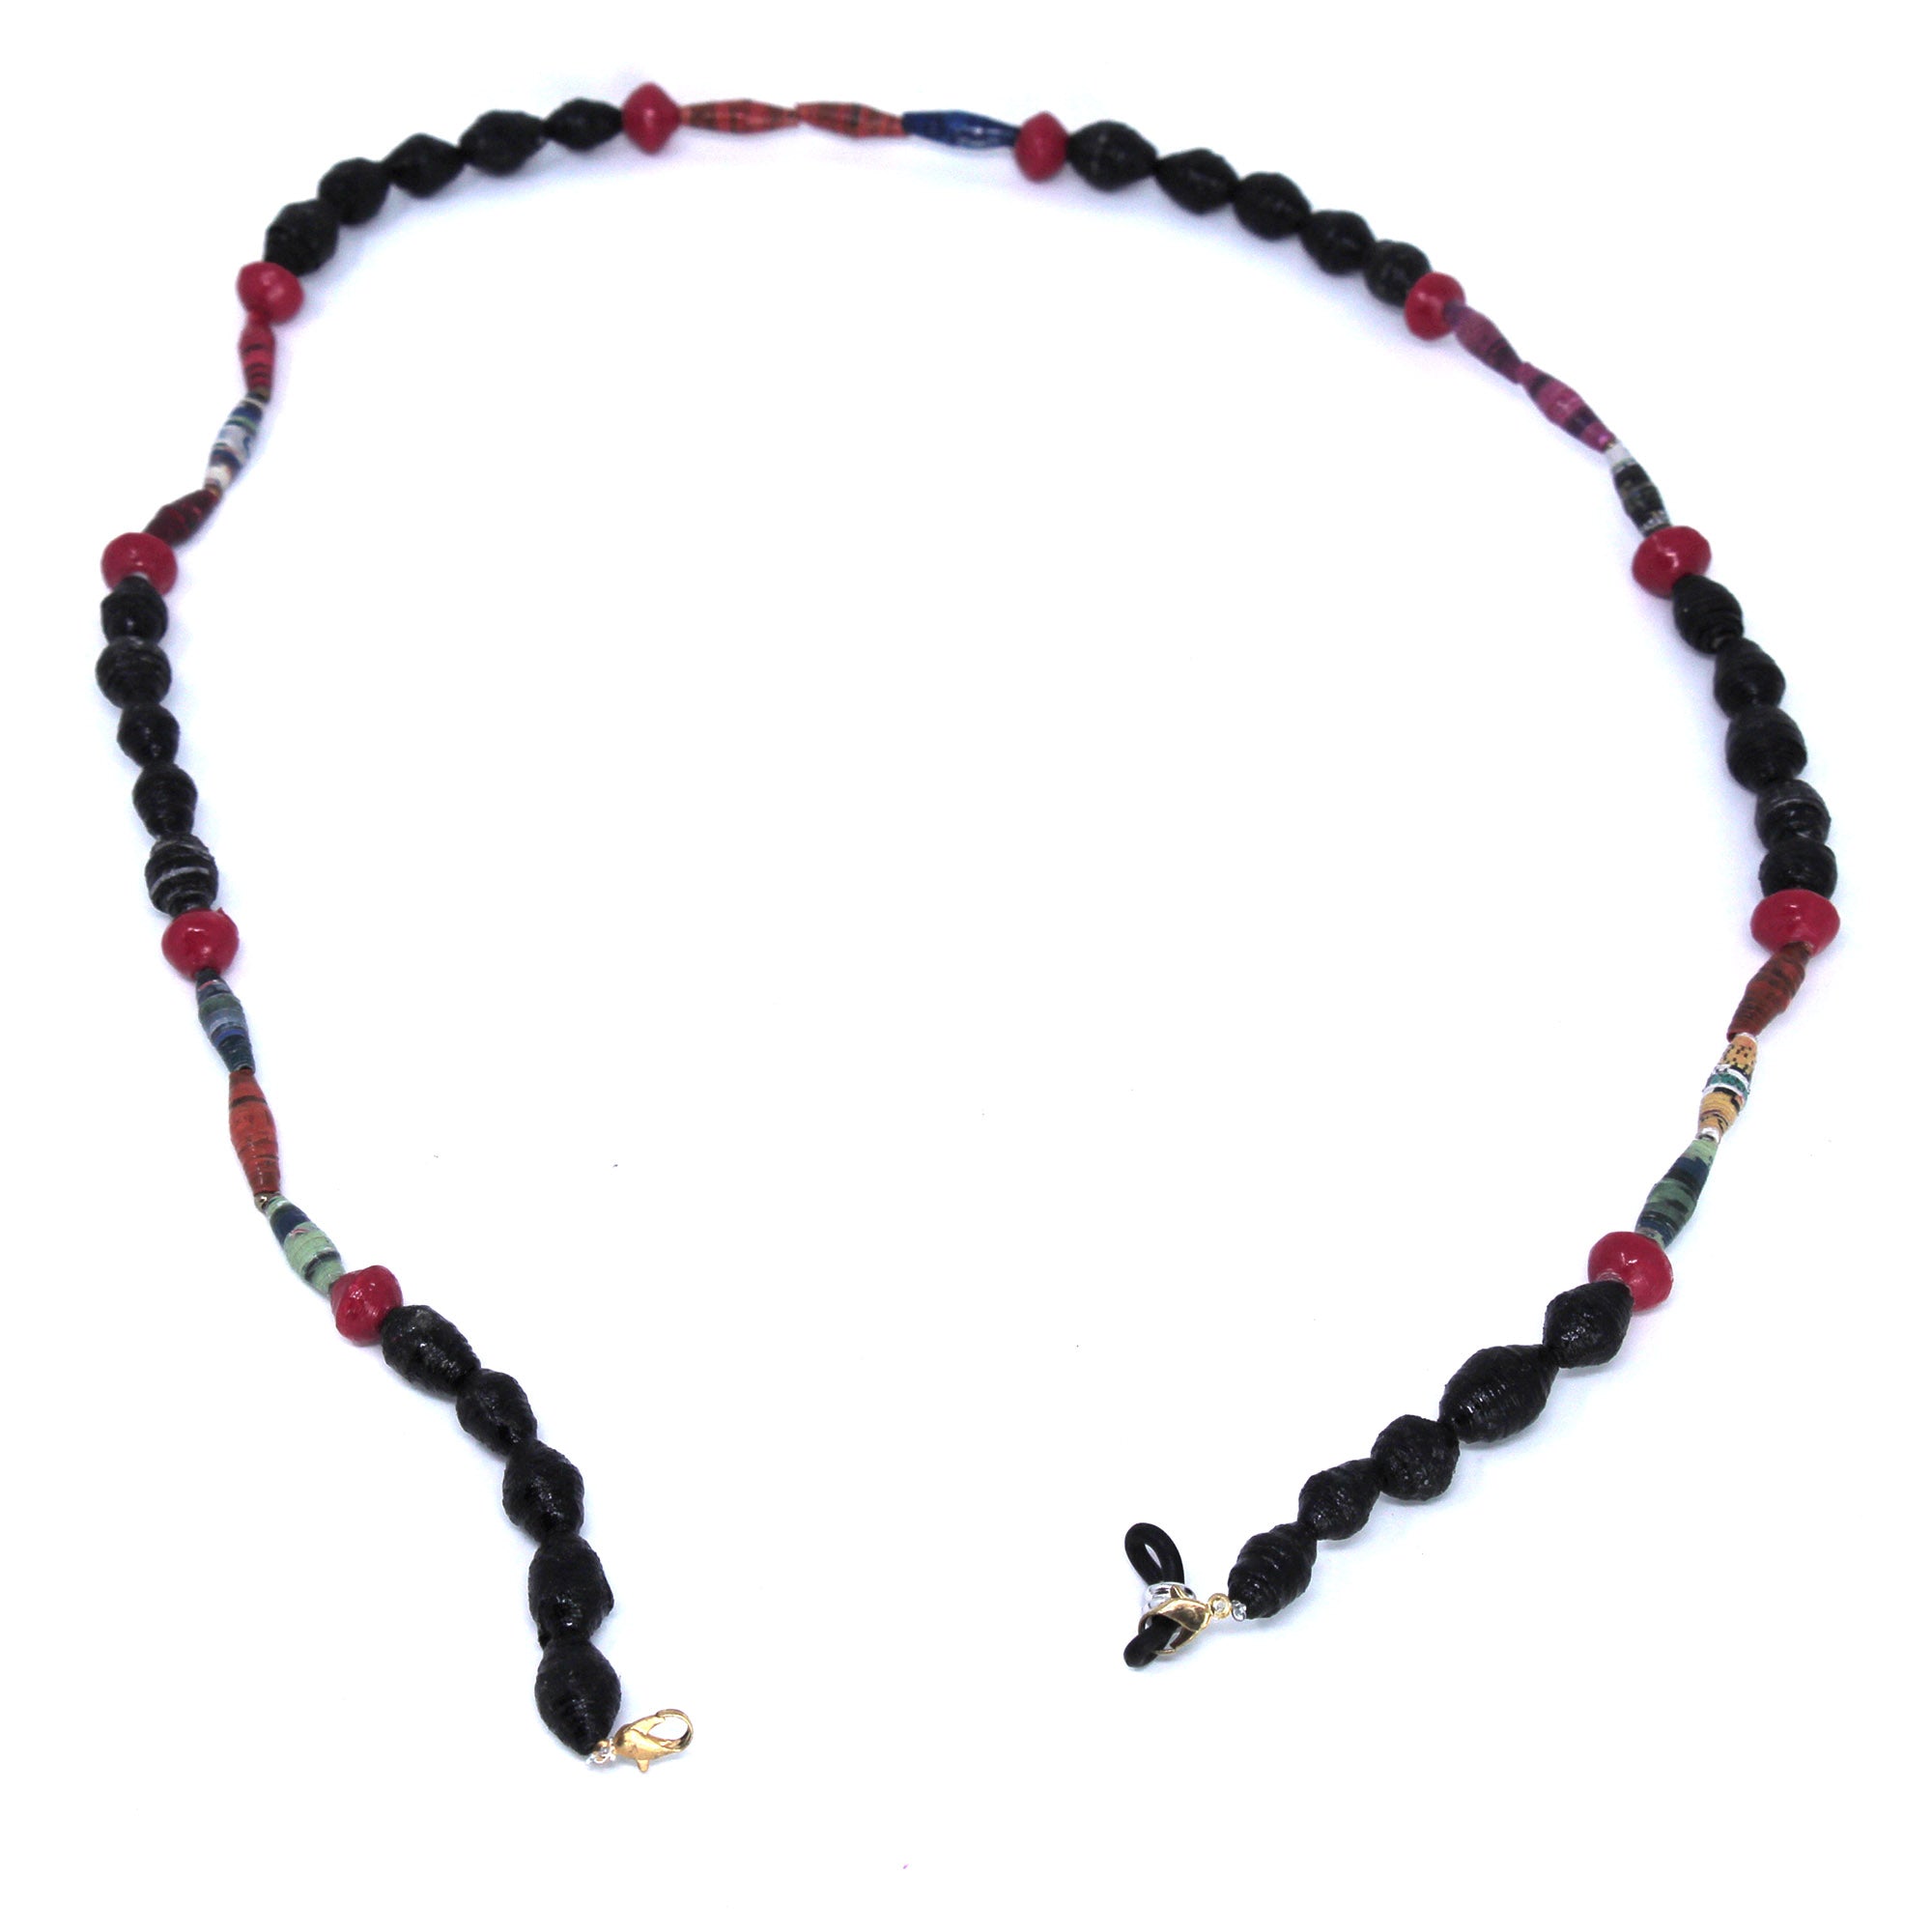 Face Mask/Eyeglass Paper Bead Chain, Black and Red